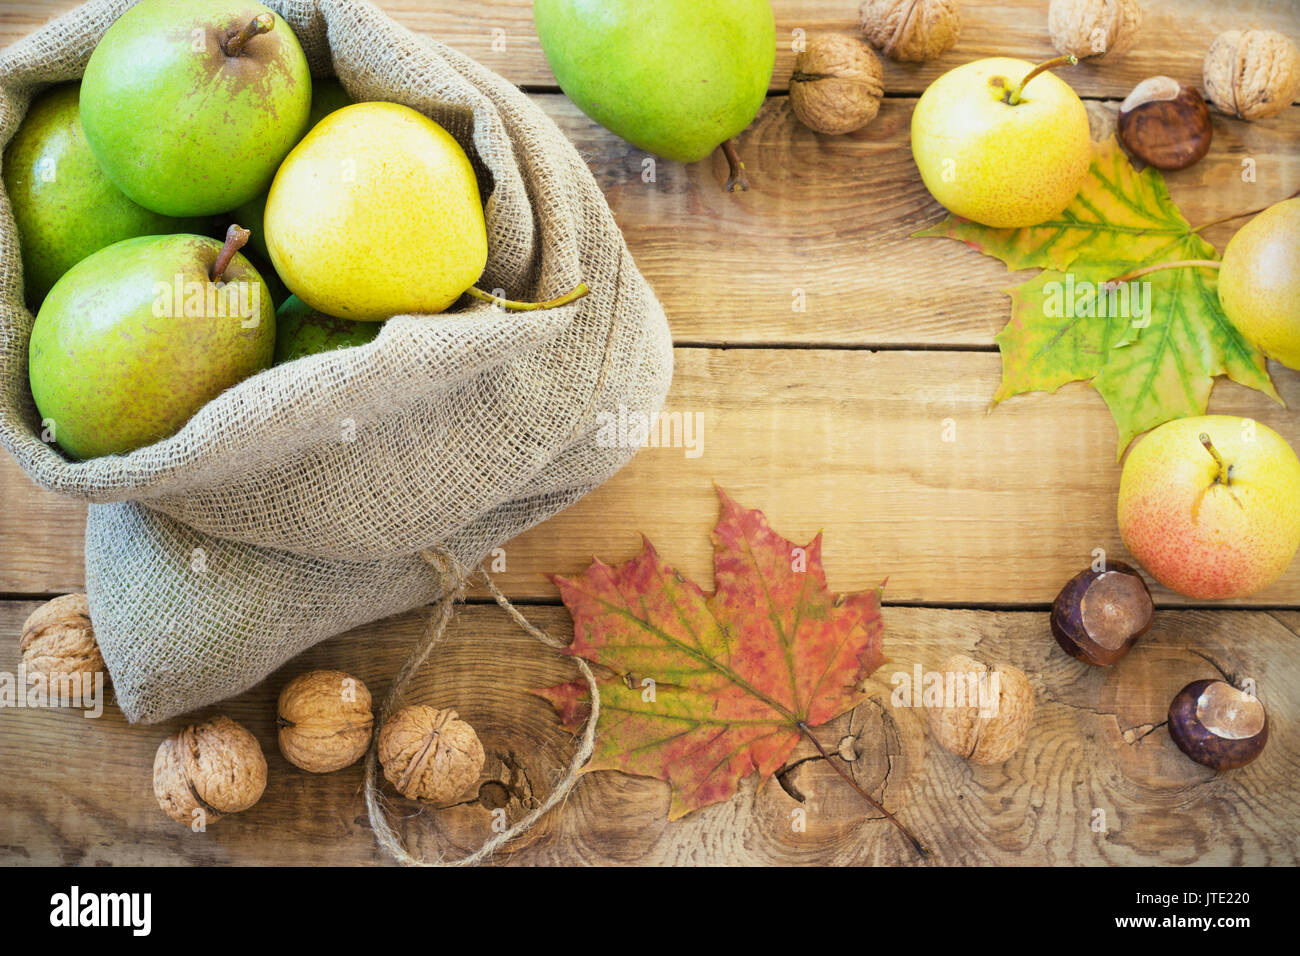 Autumn composition of fruits, nuts and spices - pears, walnuts, maple leaves on a wooden background Stock Photo